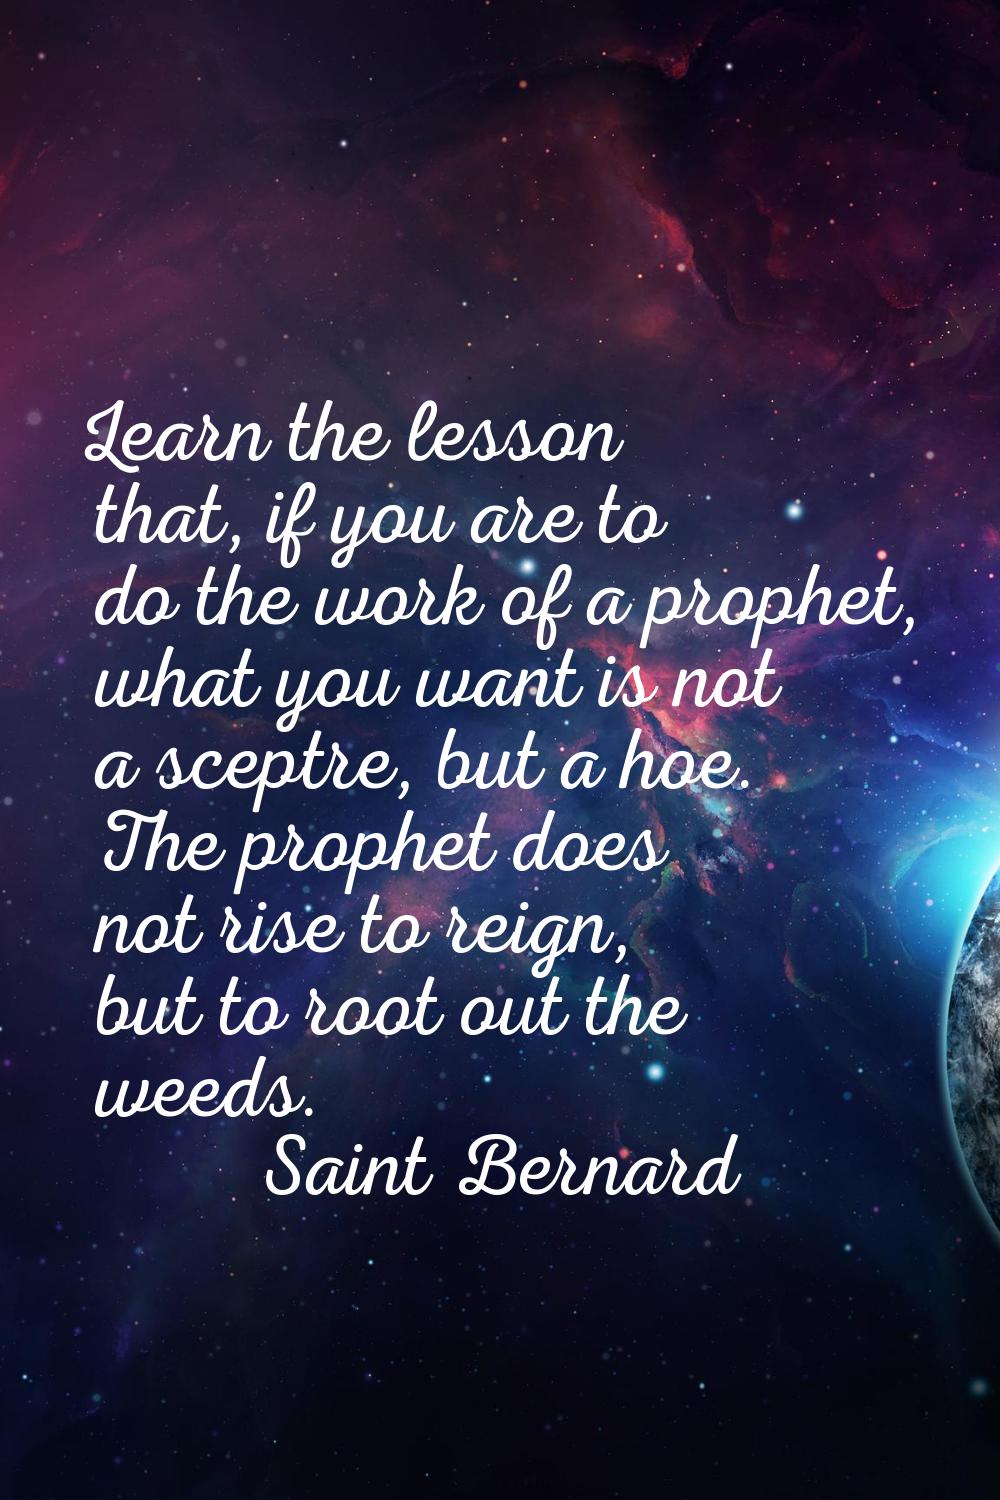 Learn the lesson that, if you are to do the work of a prophet, what you want is not a sceptre, but 